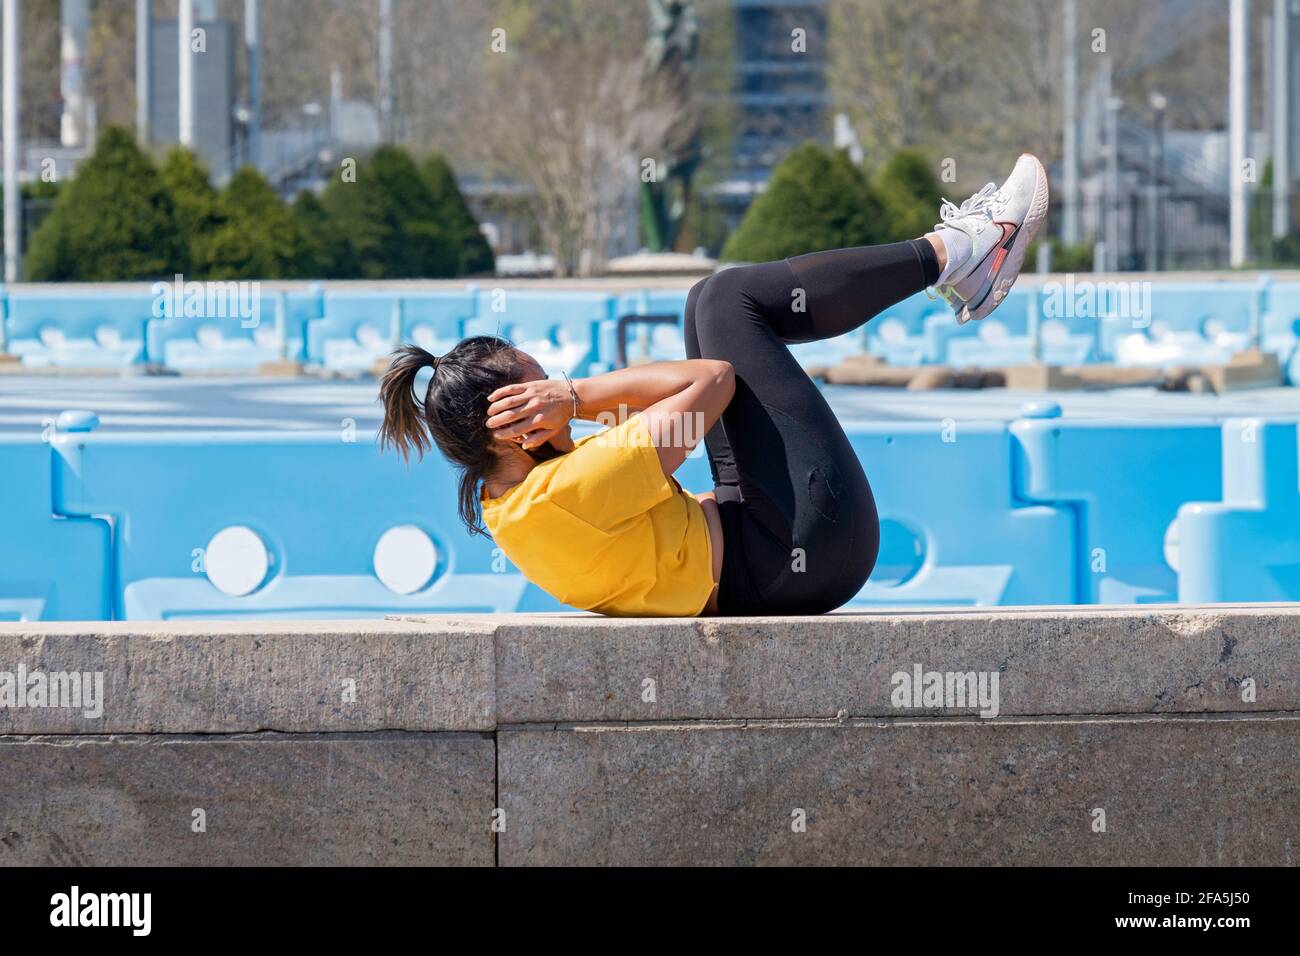 A very fit woman does crunch exercises on a ledge near the Unisphere in Flushing Meadons Corona Park in Queens, New York City. Stock Photo